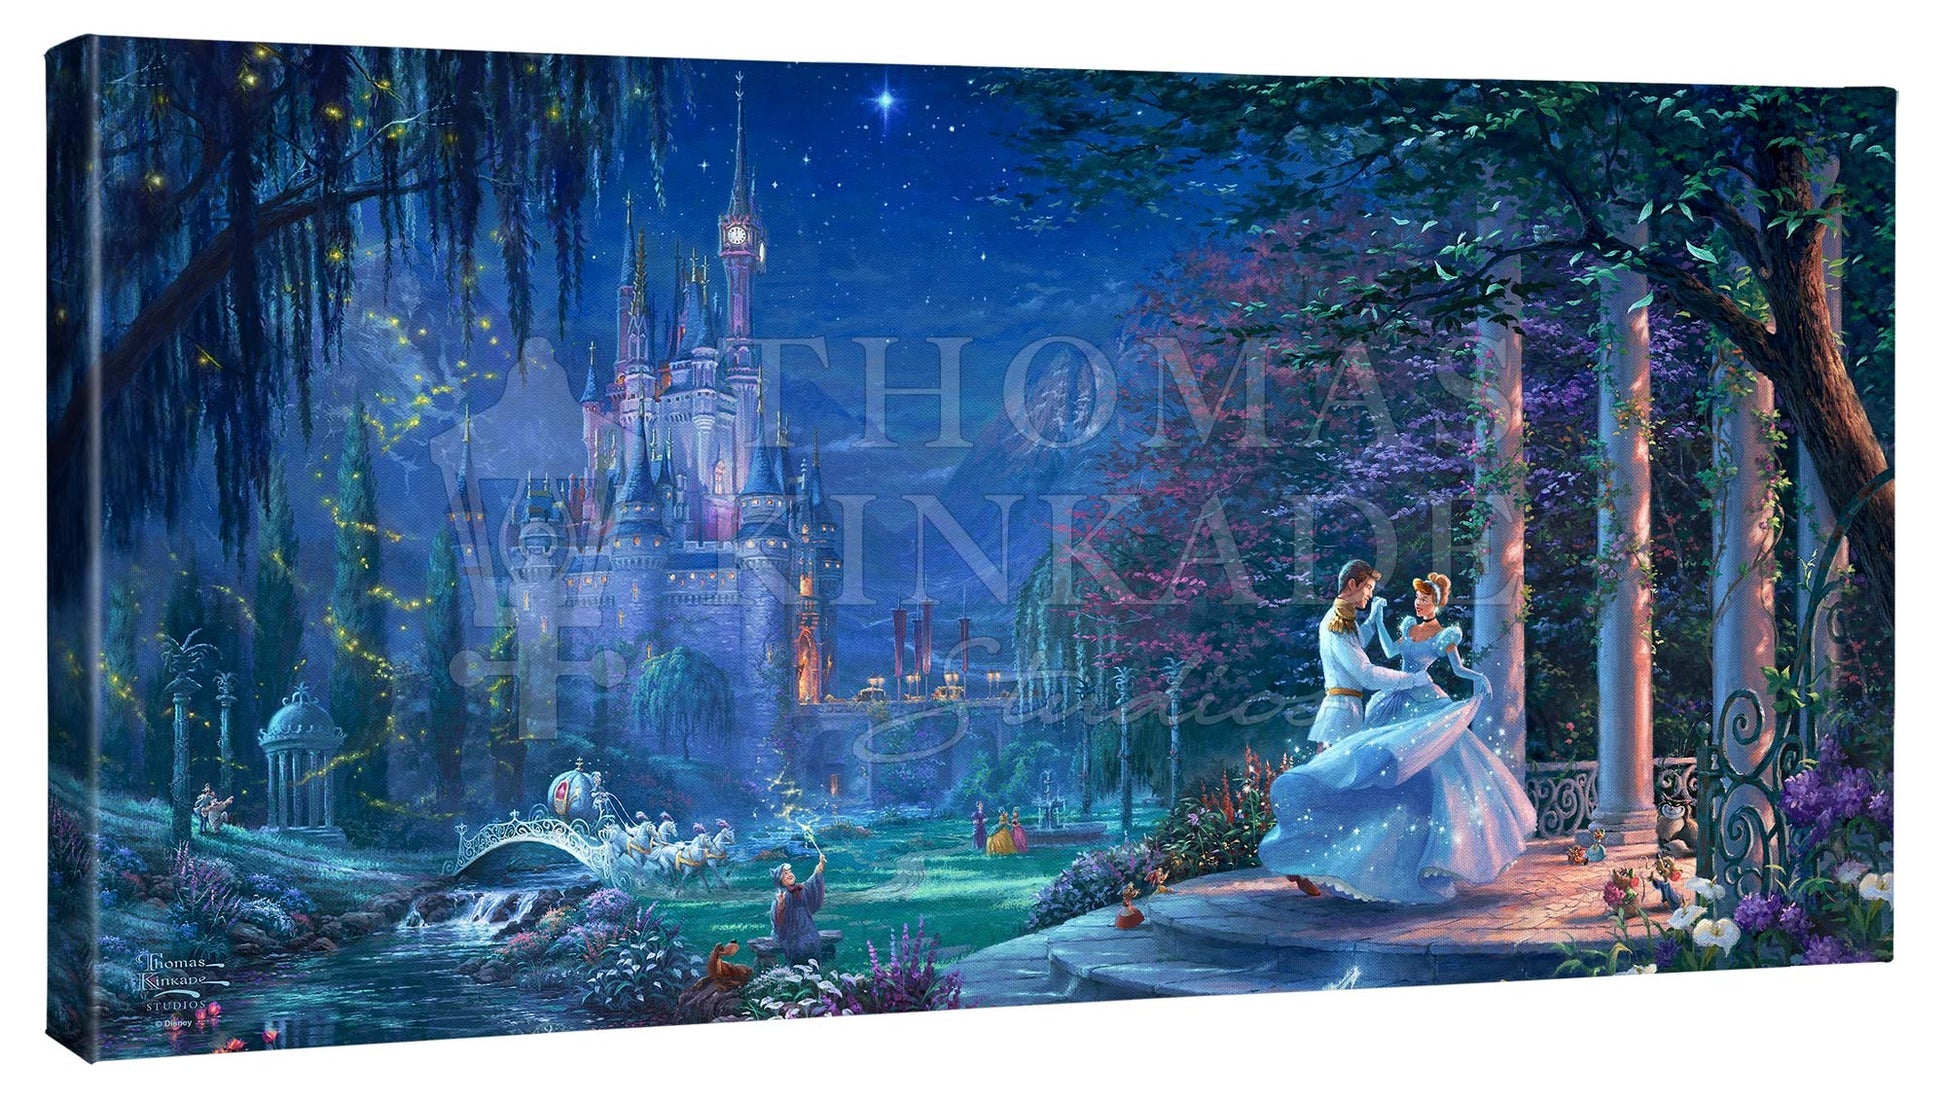 Cinderella Dancing in the Starlight by Thomas Kinkade Studios  Cinderella is in the arms of her prince. Cinderella's dreams have come true under the Starlight.  